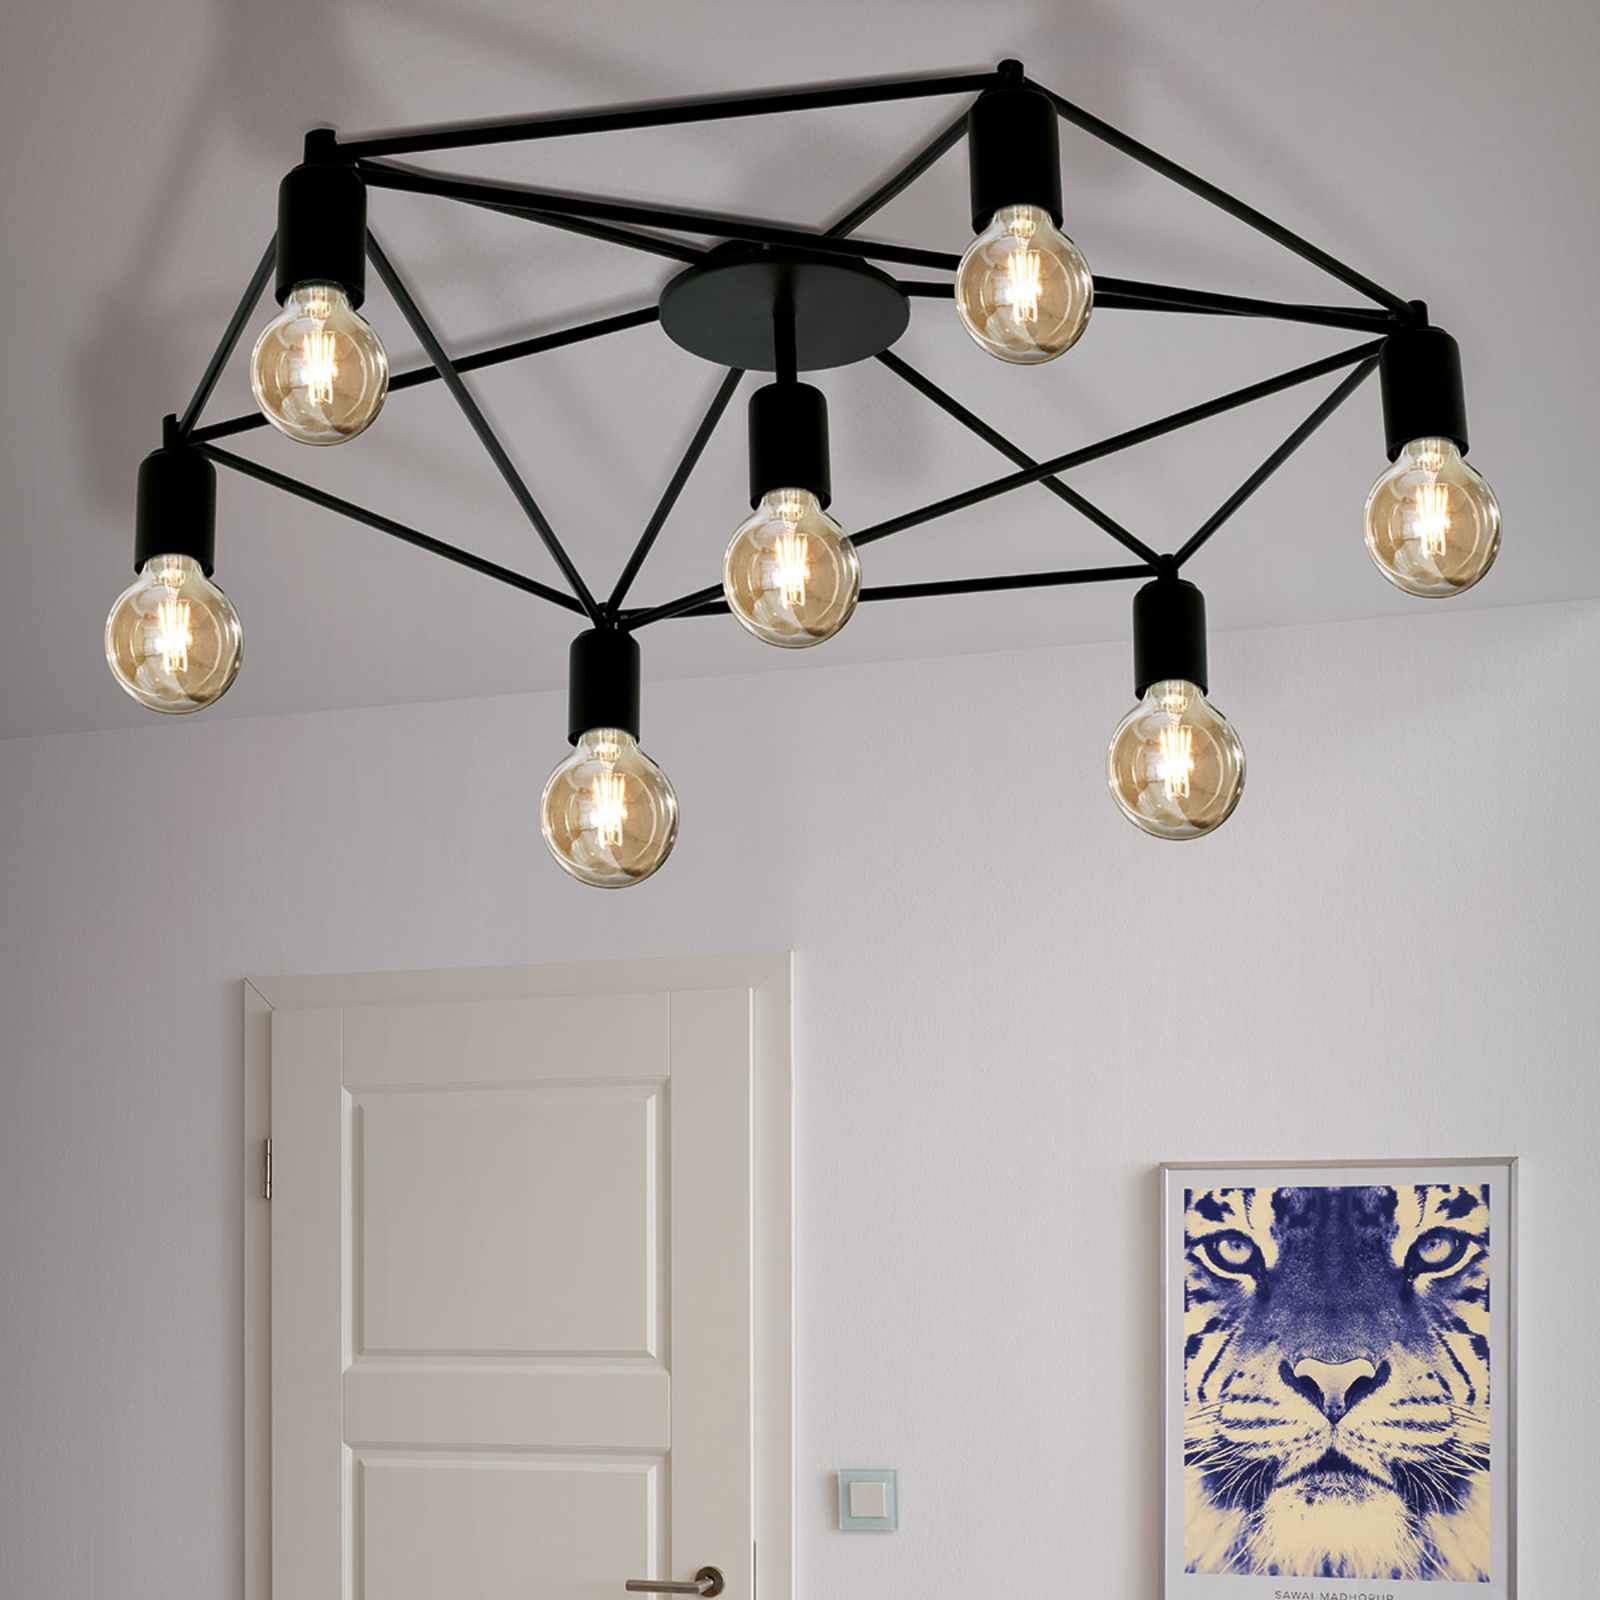 Staiti ceiling light black without lampshades